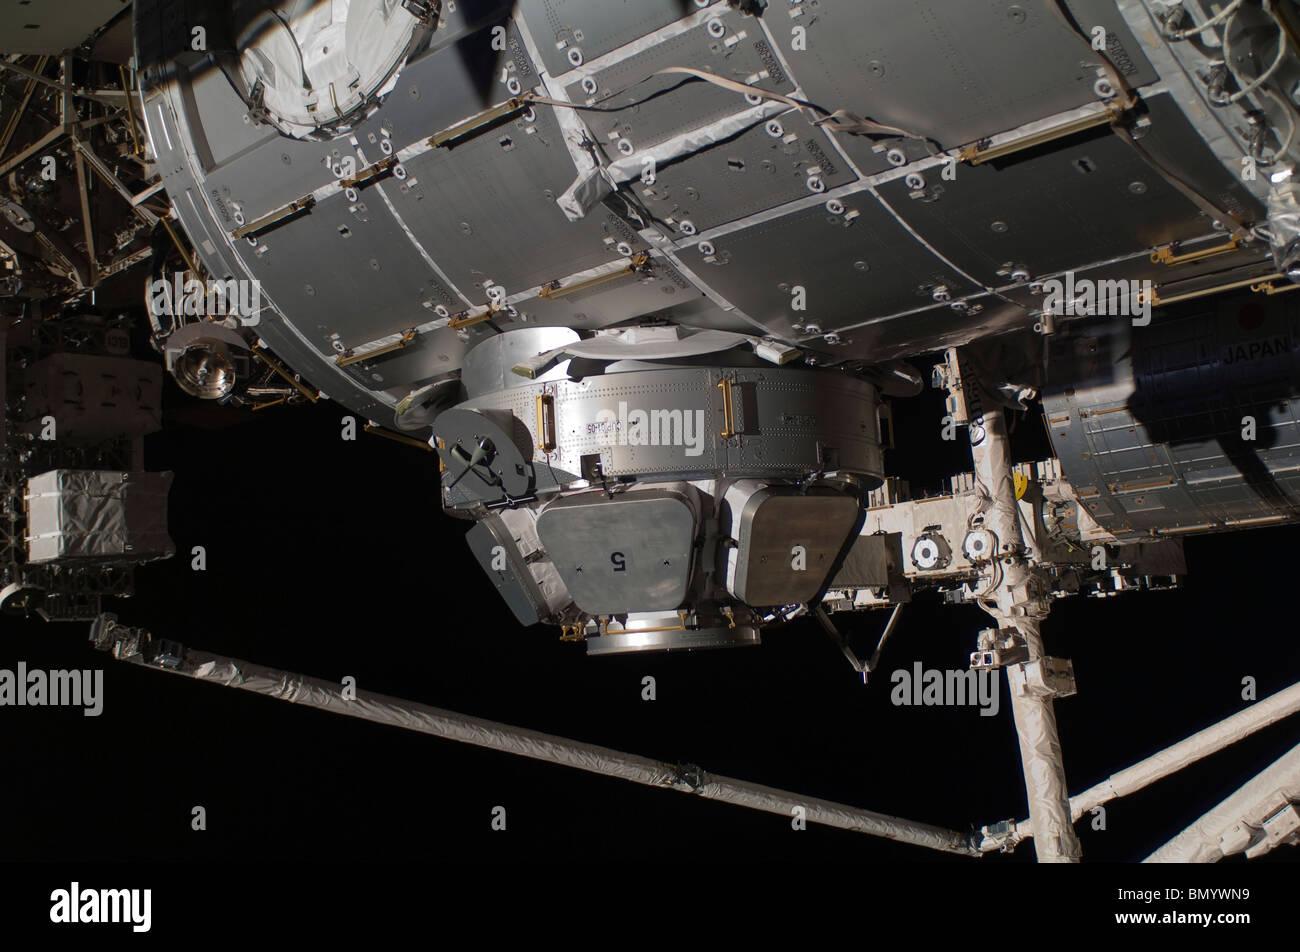 February 17, 2010 - The International Space Station's Tranquility node and its Cupola. Stock Photo